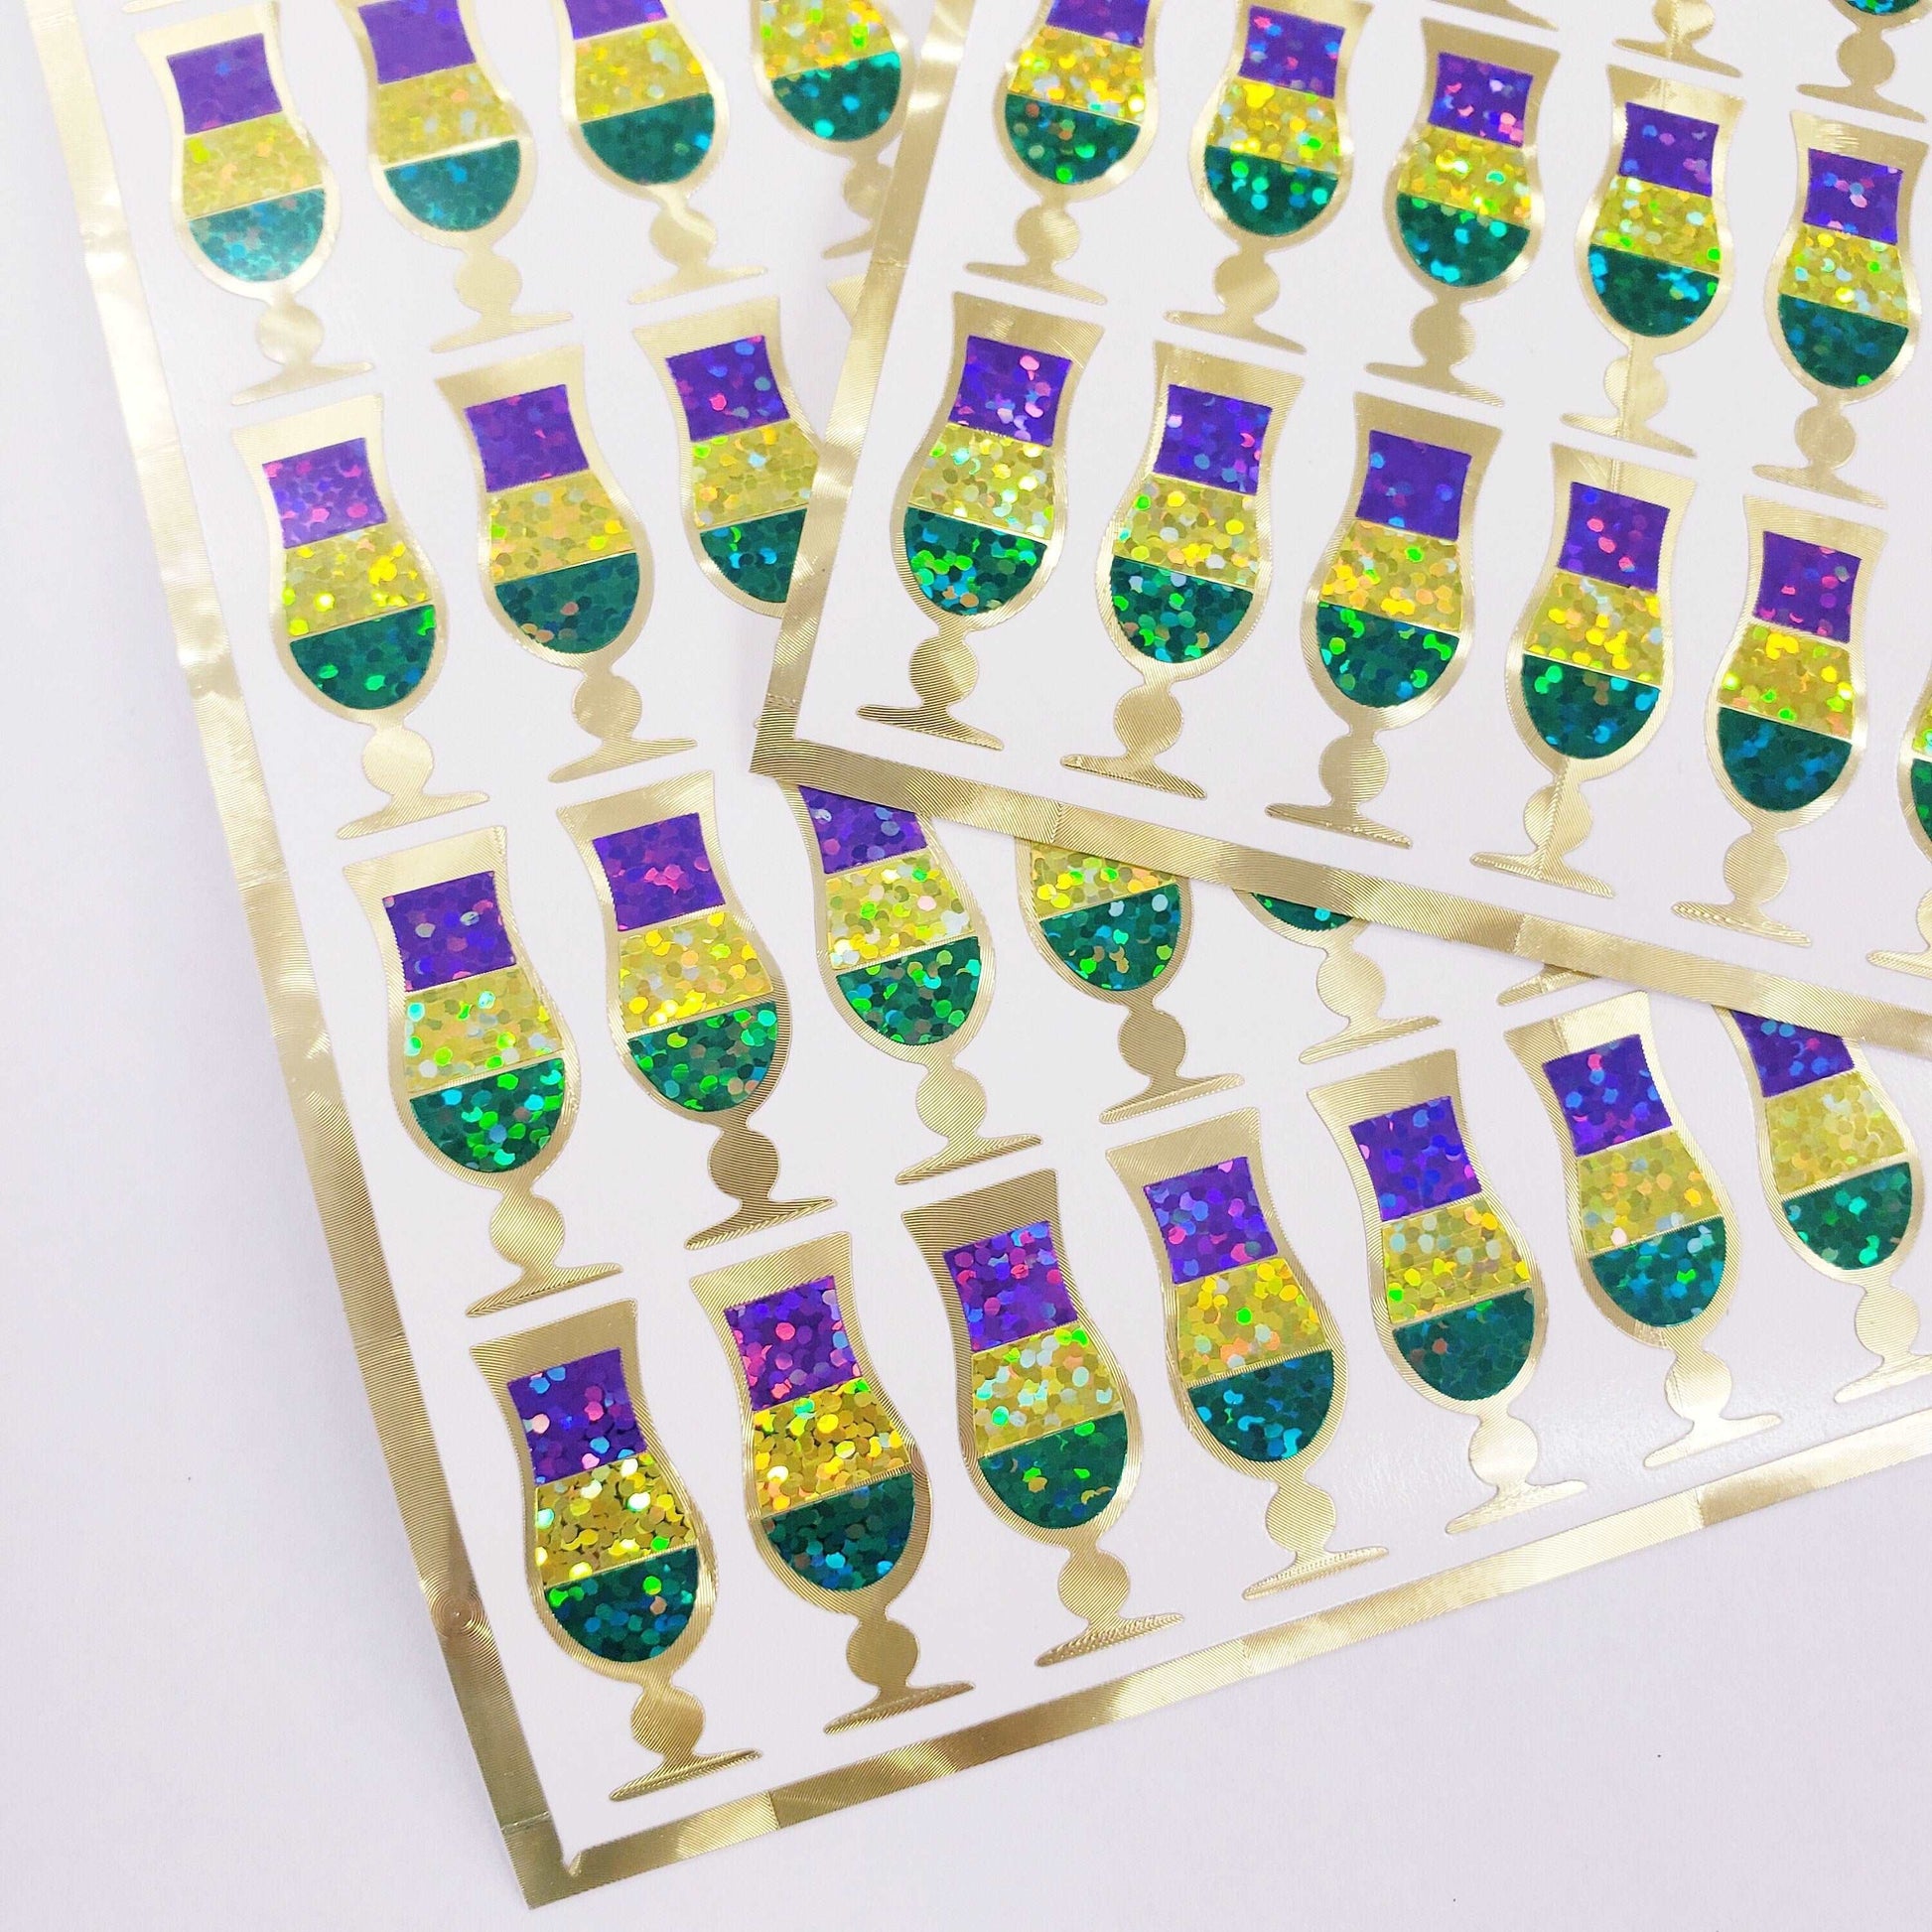 Mardi Gras Stickers, set of 40 Purple, Green, and Gold Hurricane Glass Decals for Fat Tuesday, Louisiana Inspired Drinks, Ash Wednesday